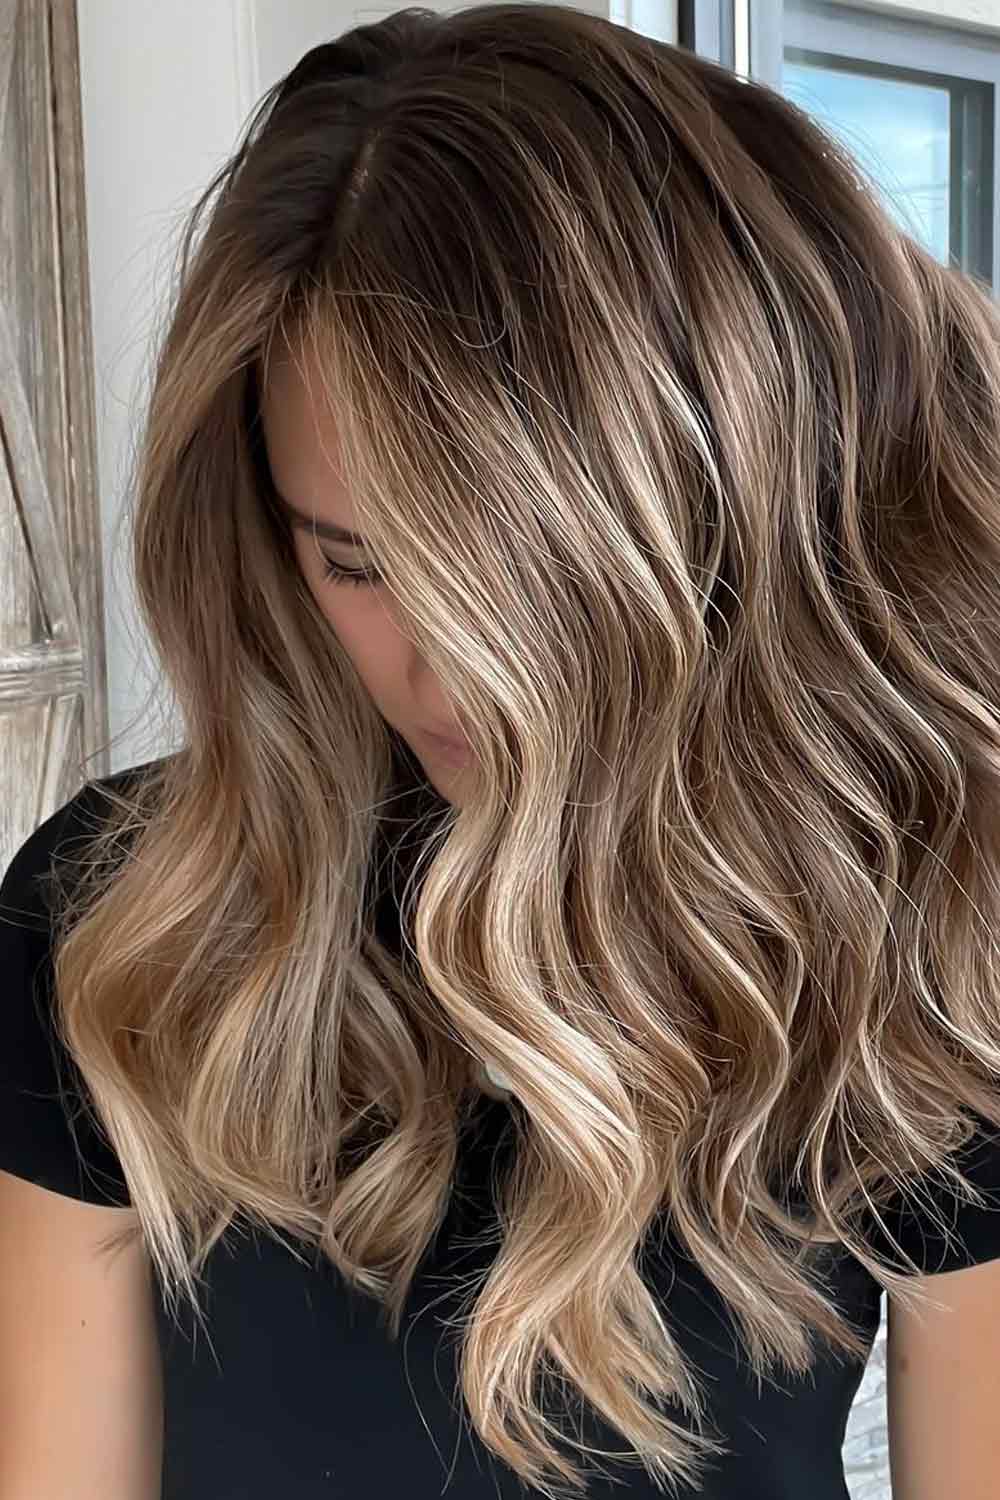 This Year's Hottest Types of Highlights for Your Hair - Garnier